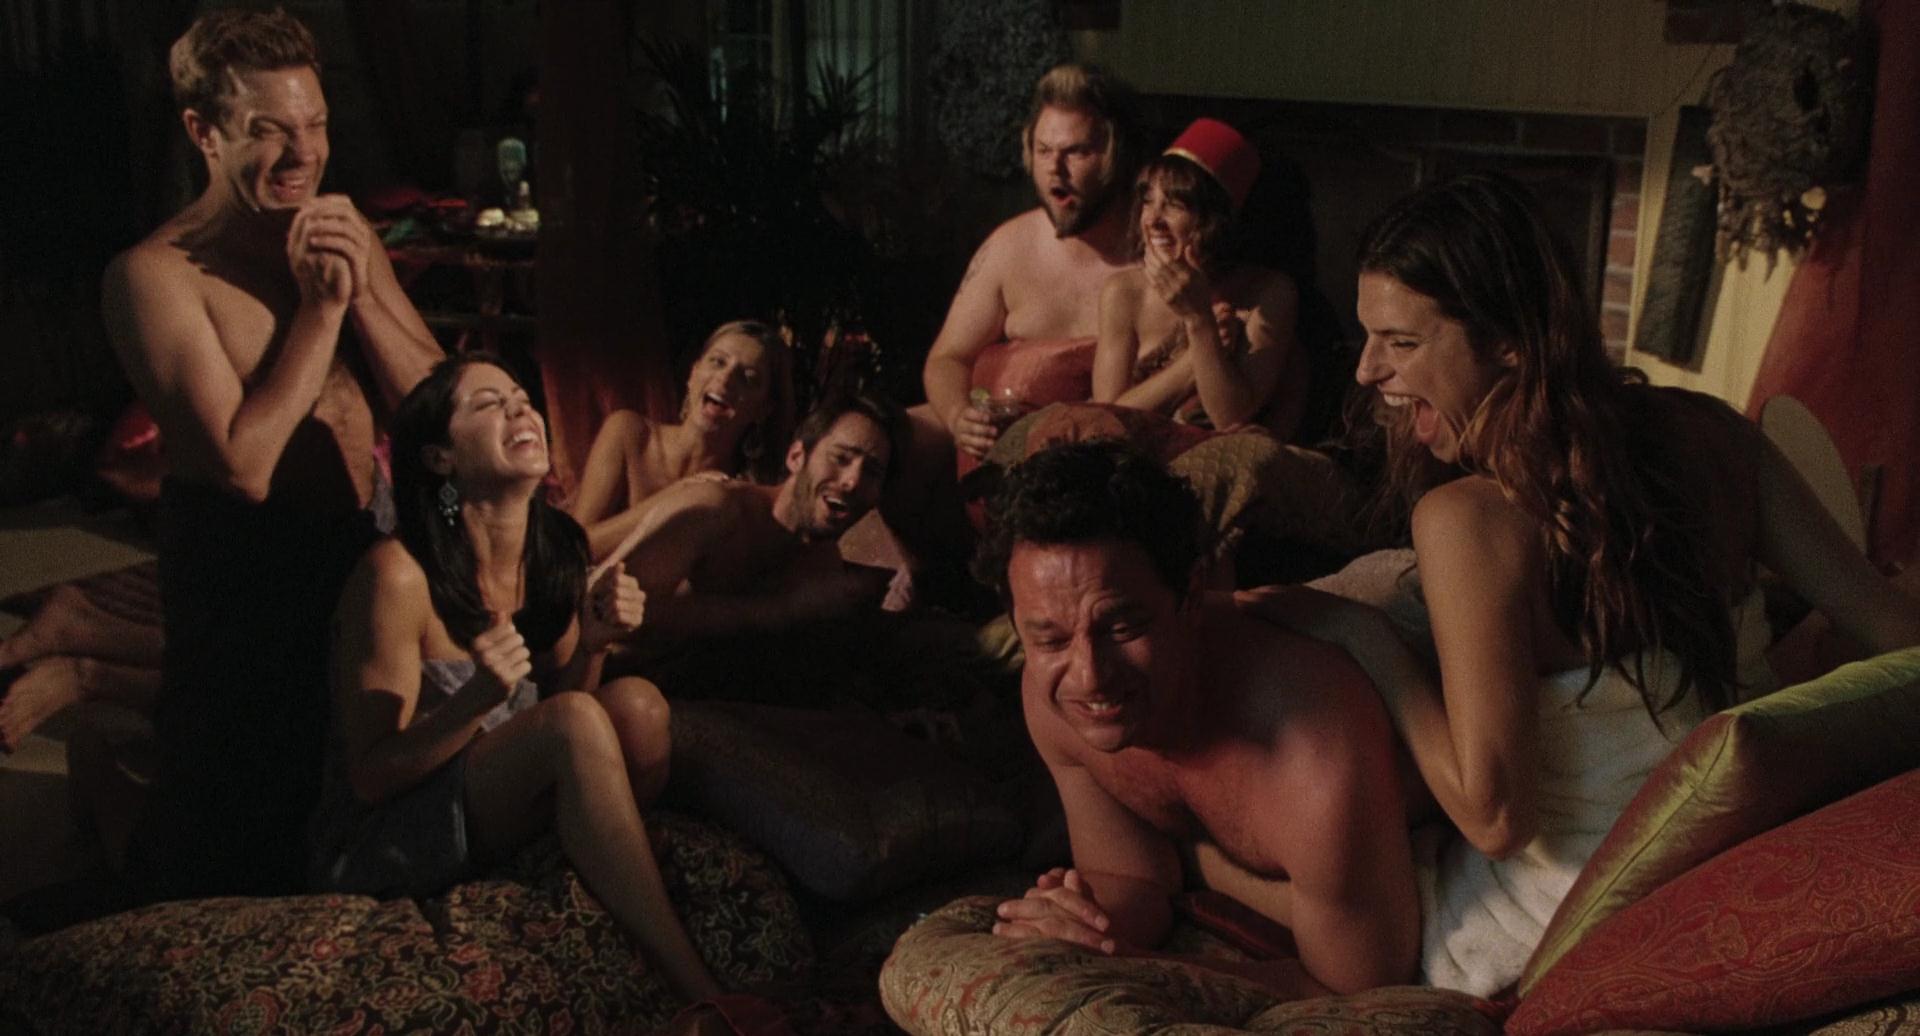 A good old fashioned orgy nude scenes